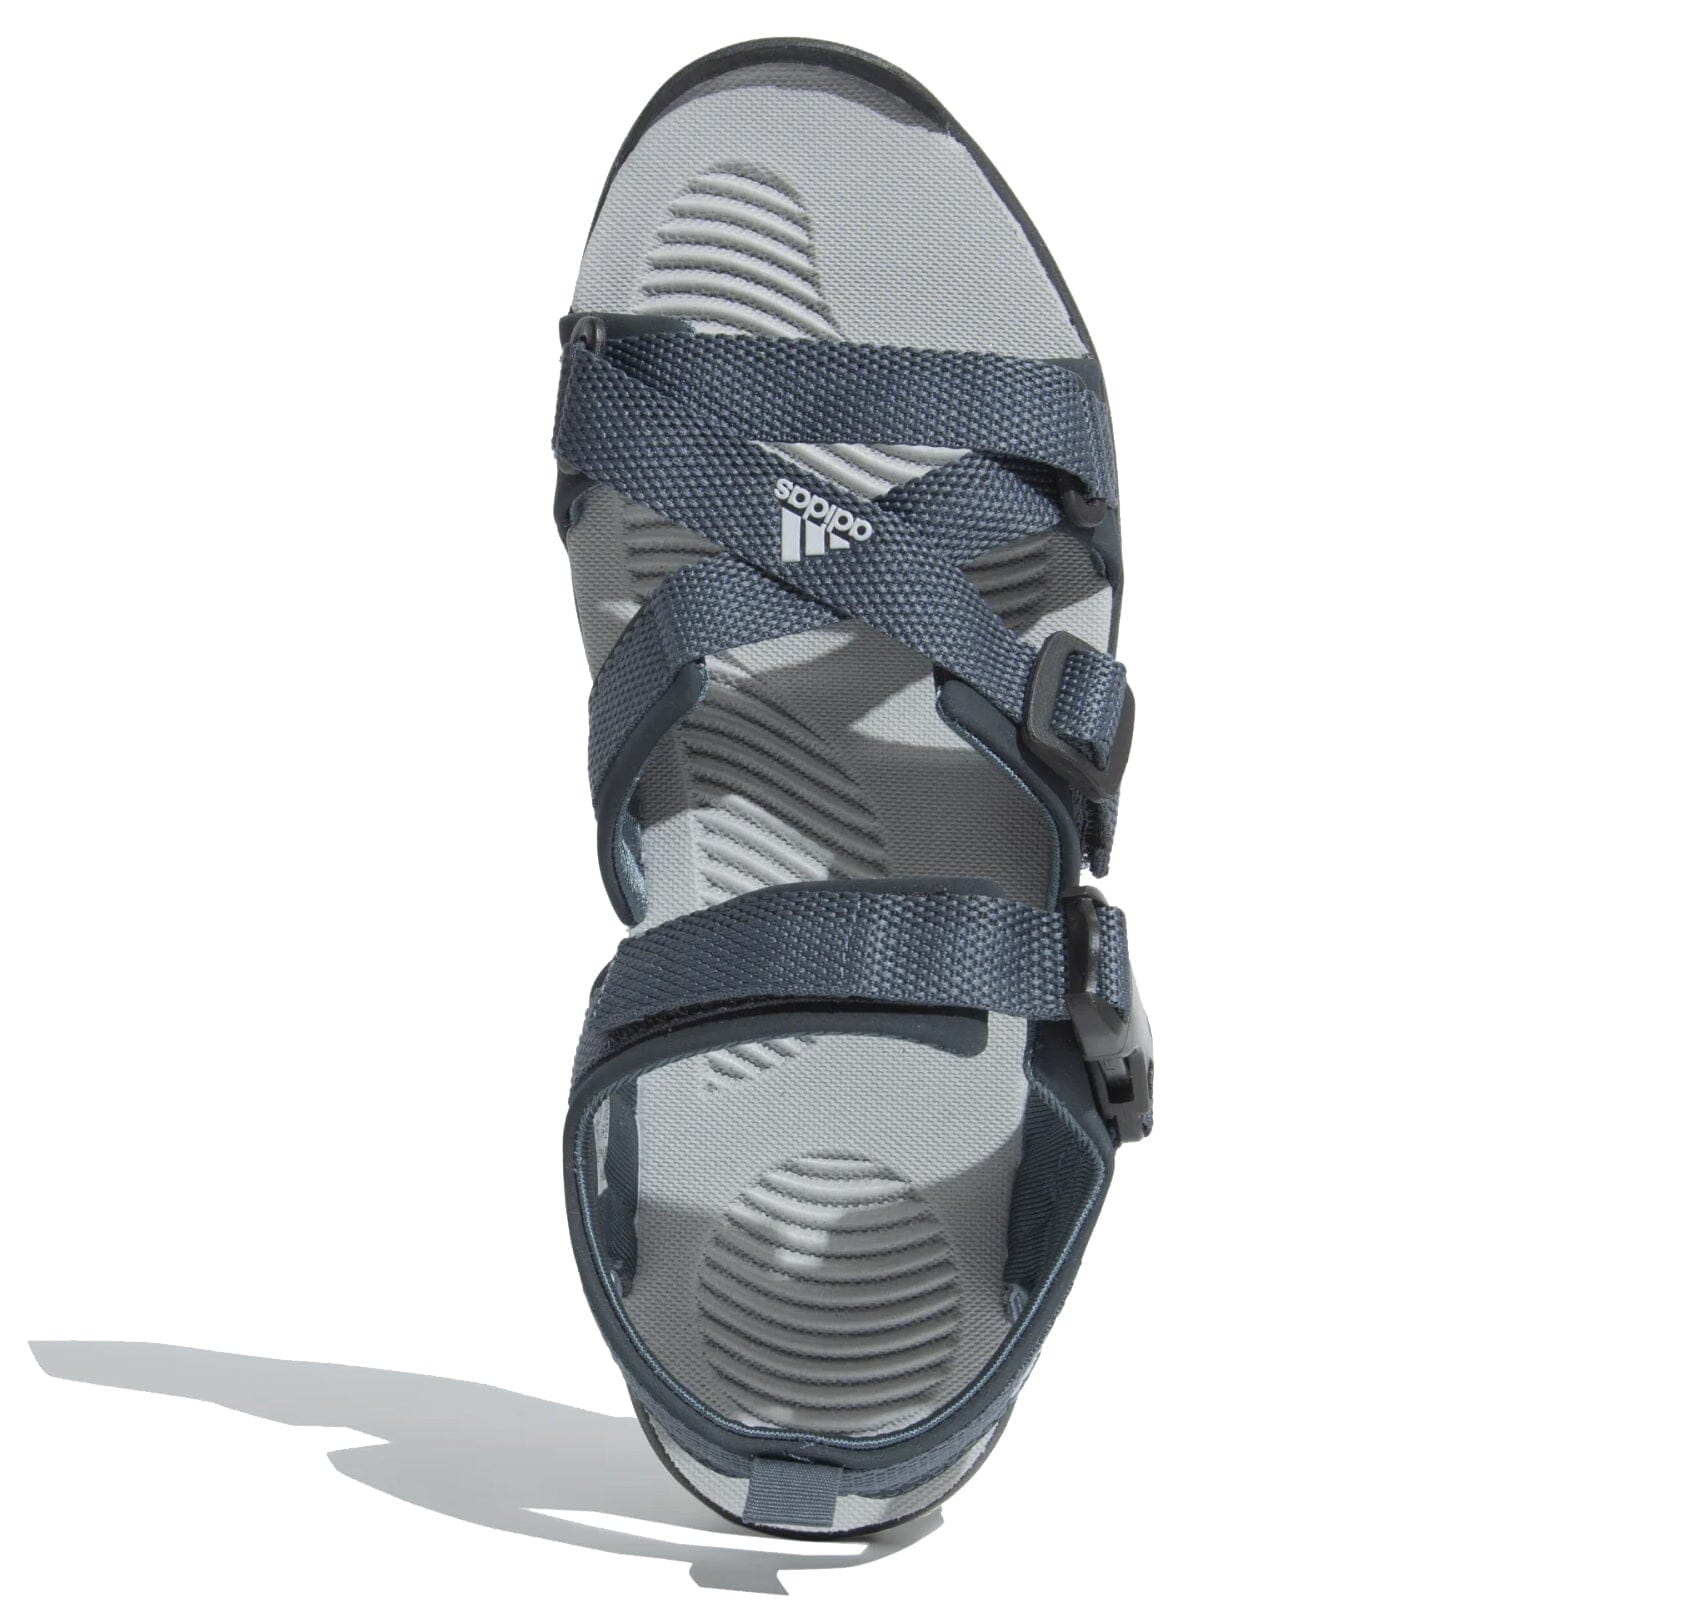 ADIDAS GLADI SANDALS Price Starting From Rs 2,909 | Find Verified Sellers  at Justdial